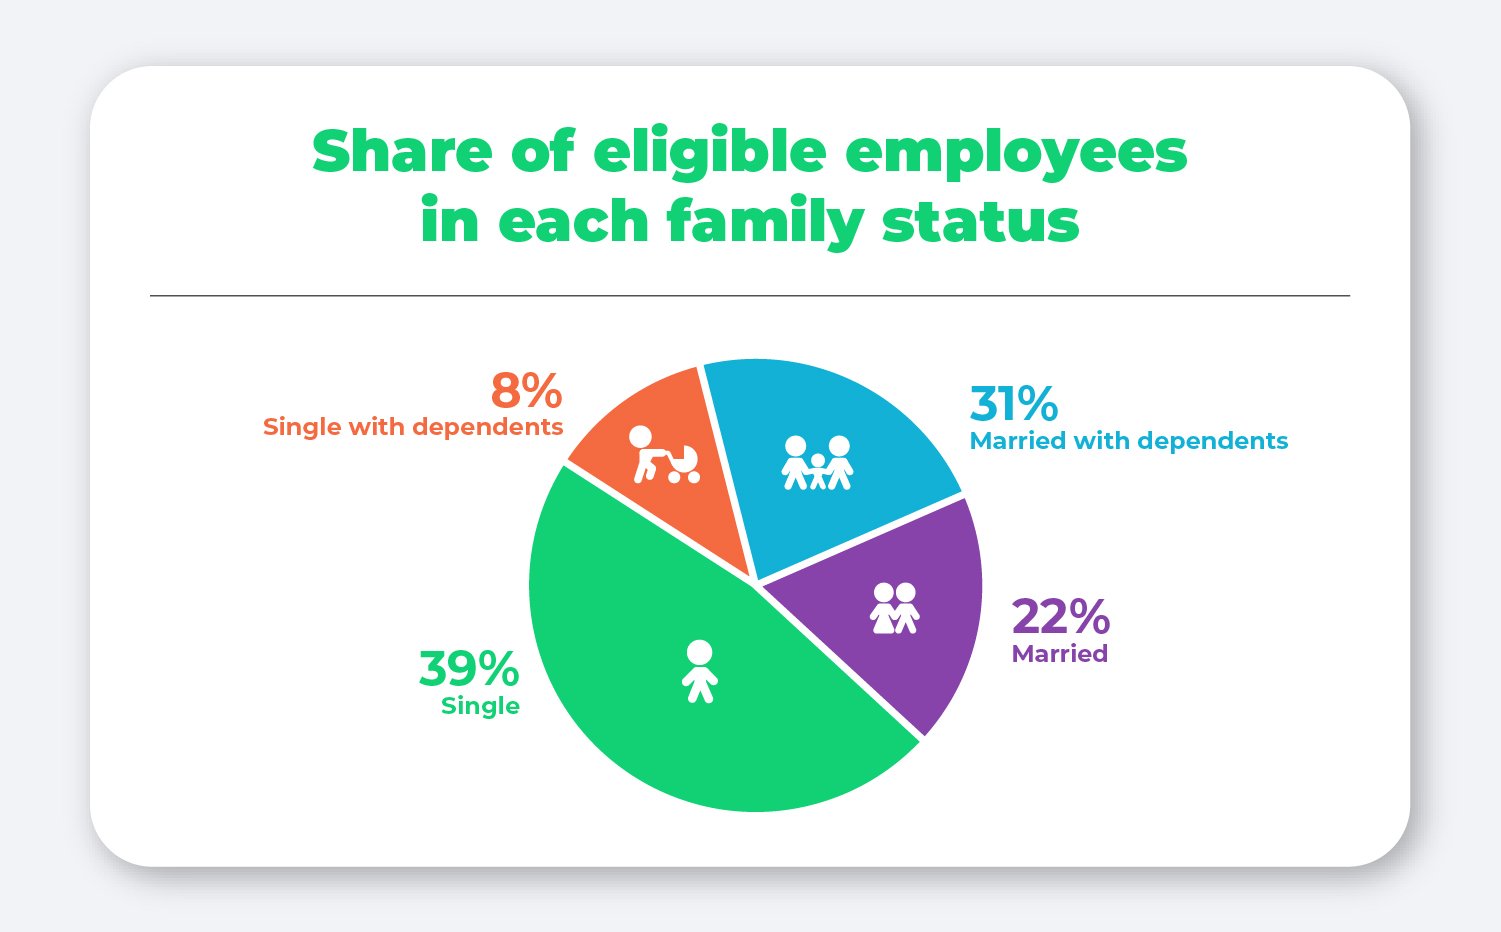 Share of eligible employees in each family status